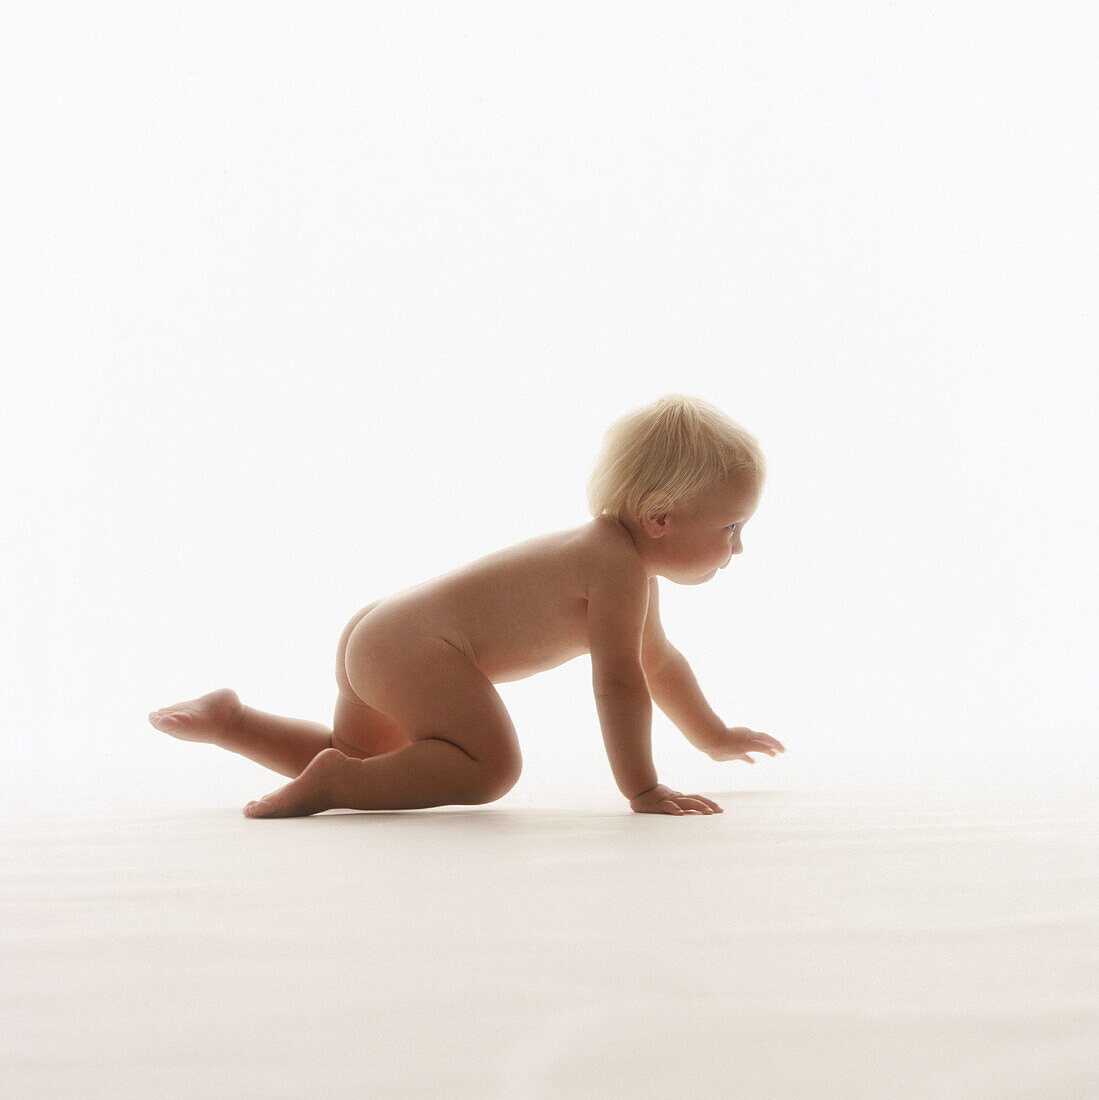 ldhood, Children, Color, Colour, Contemporary, Crawl, Crawling, Fair-haired, First moves, First steps, Full-body, Full-length, Human, Indoor, Indoors, Infant, Infantile, Infants, Interior, Kid, Kids